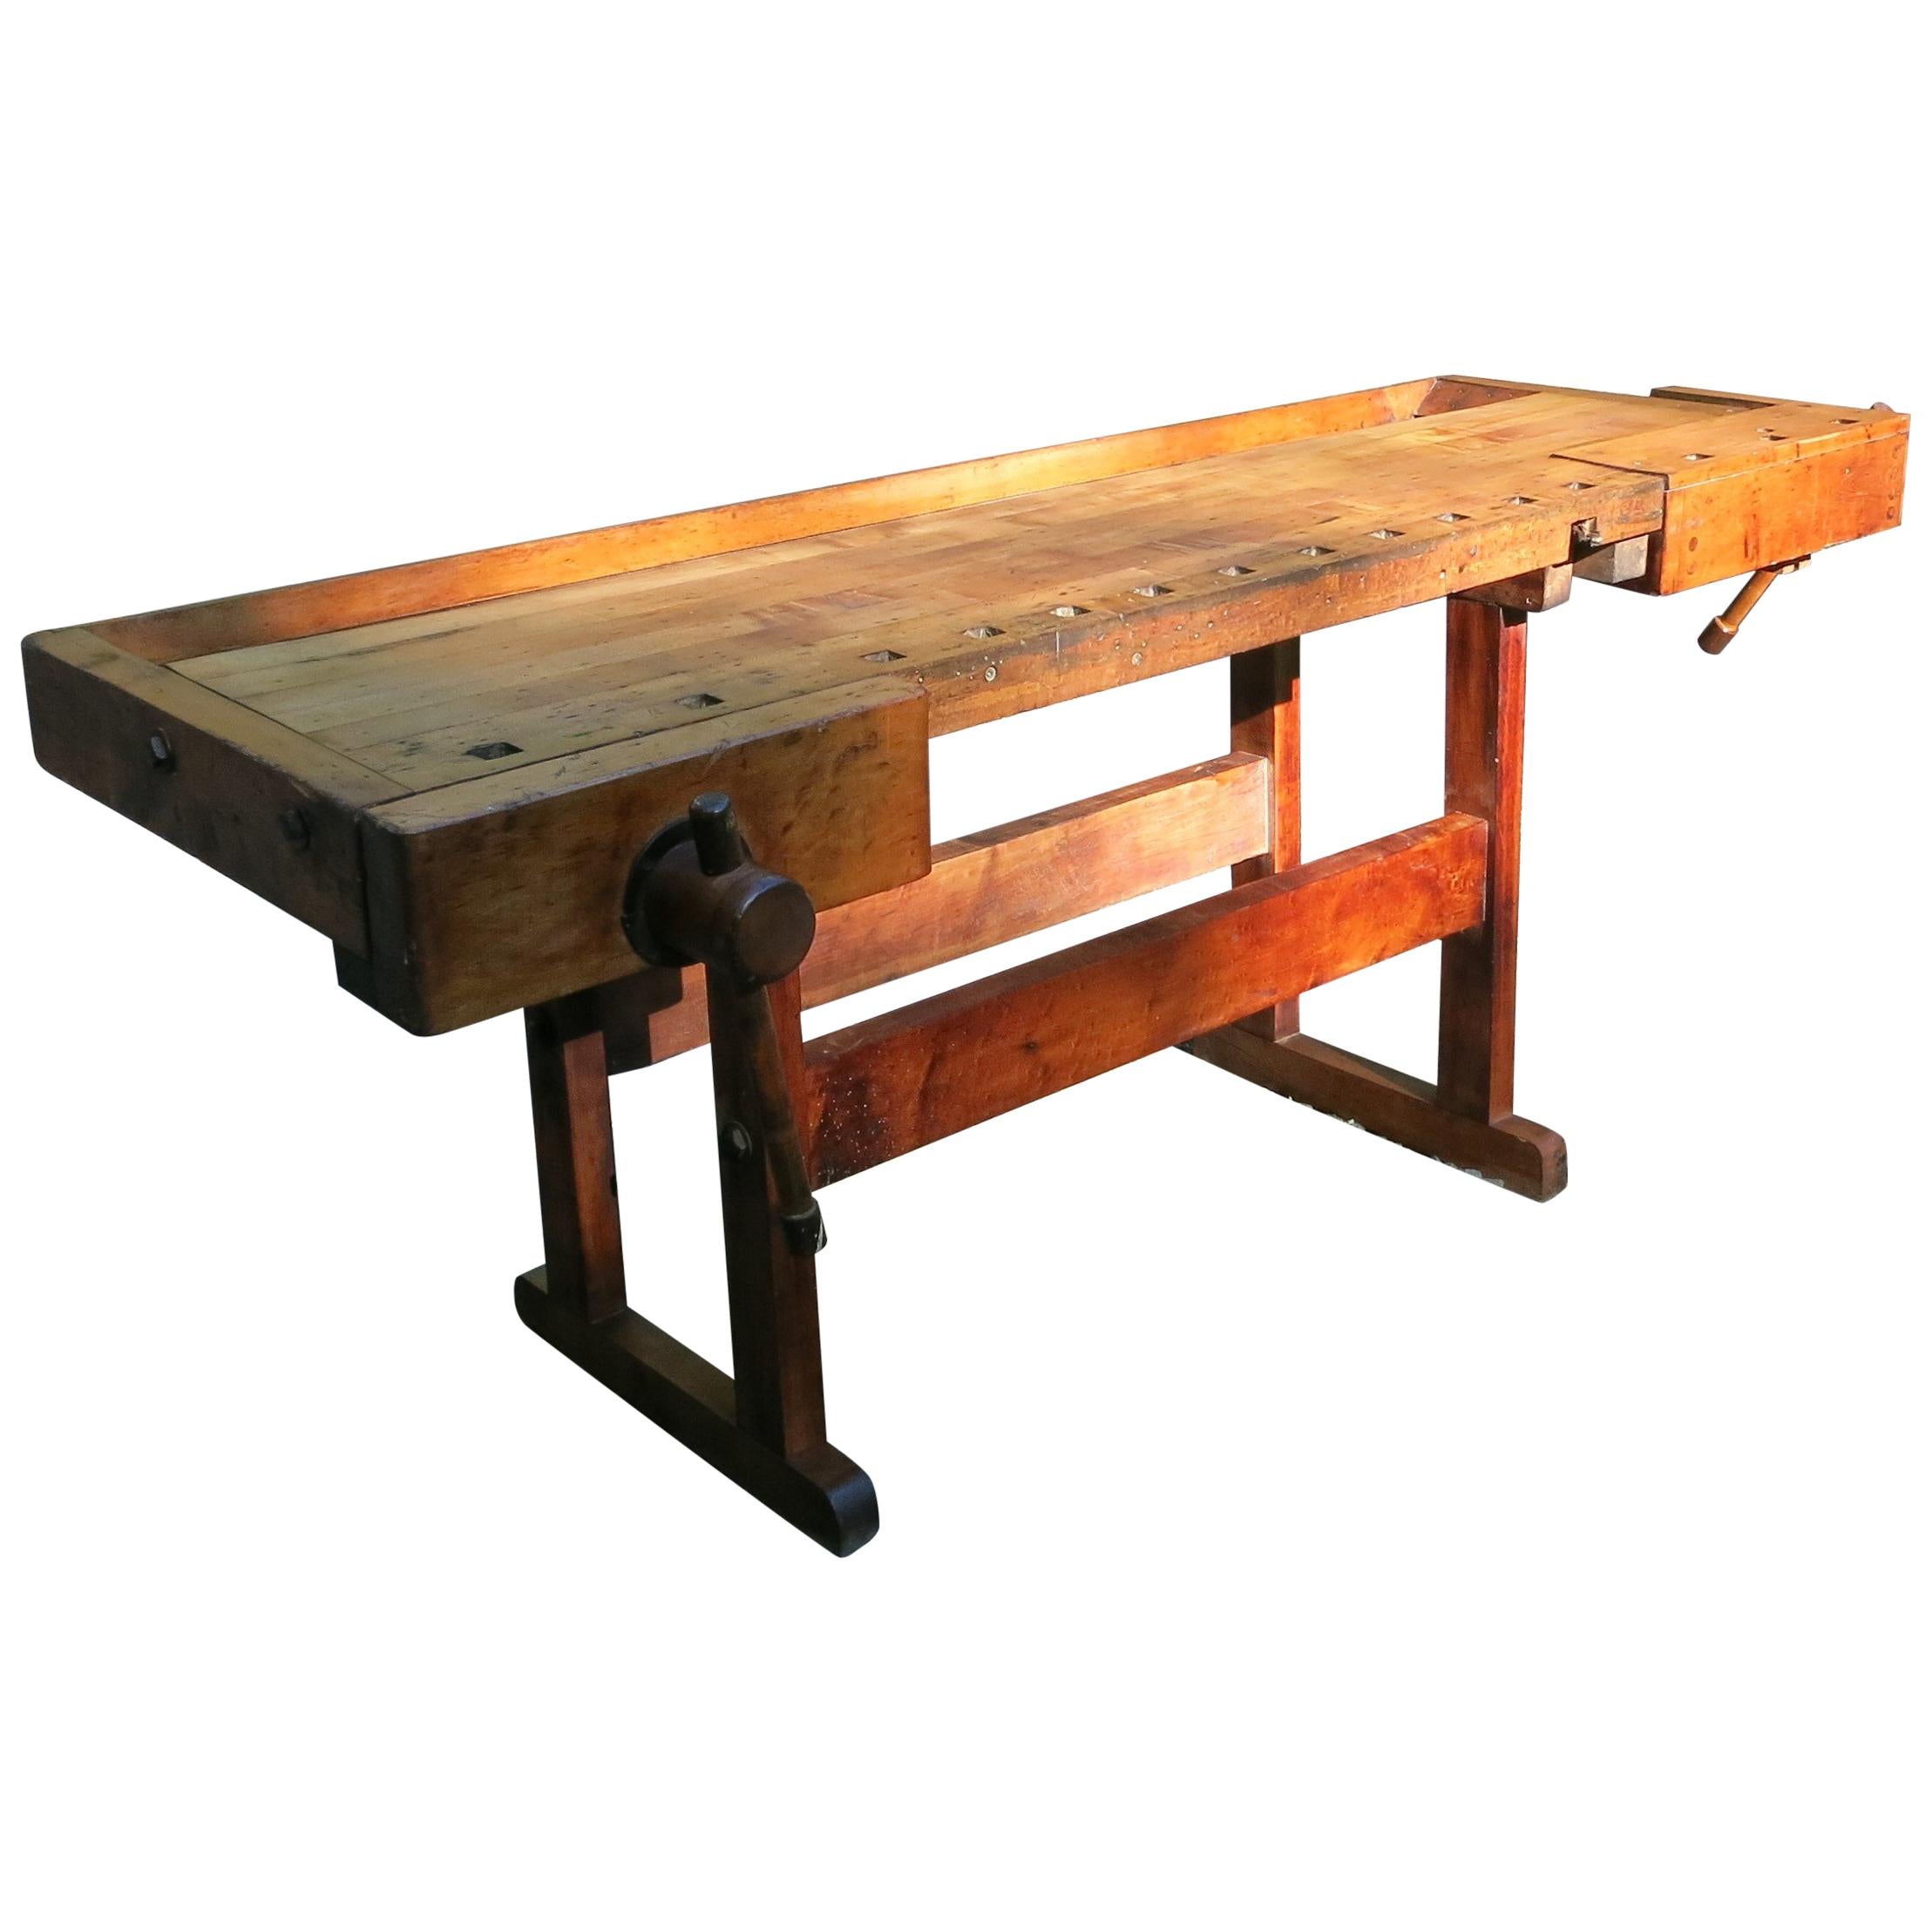 Antique Carpenters Workbench from Wissner Piano Factory Newark N.J., circa 1900